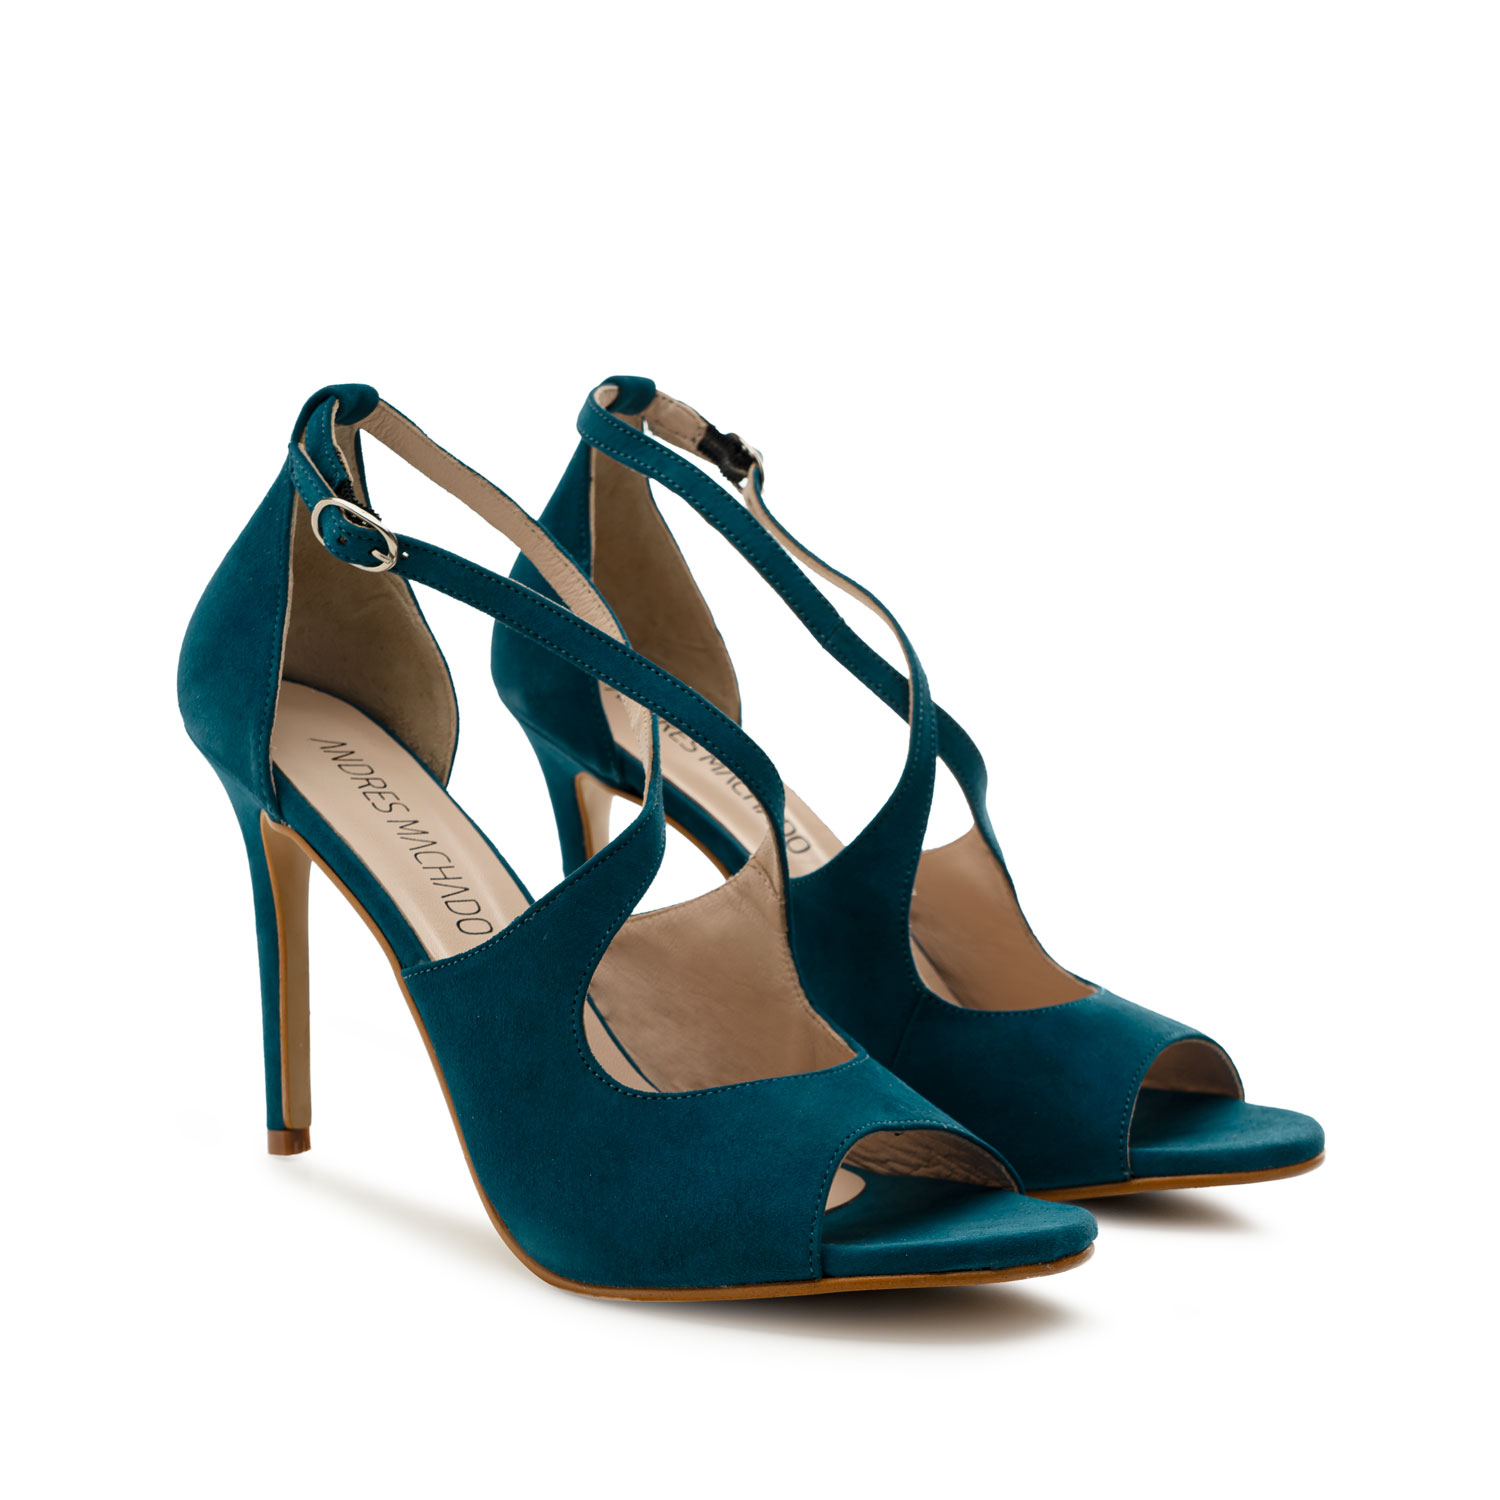 Stiletto Crossed Sandals in Deep Blue Suede Leather 